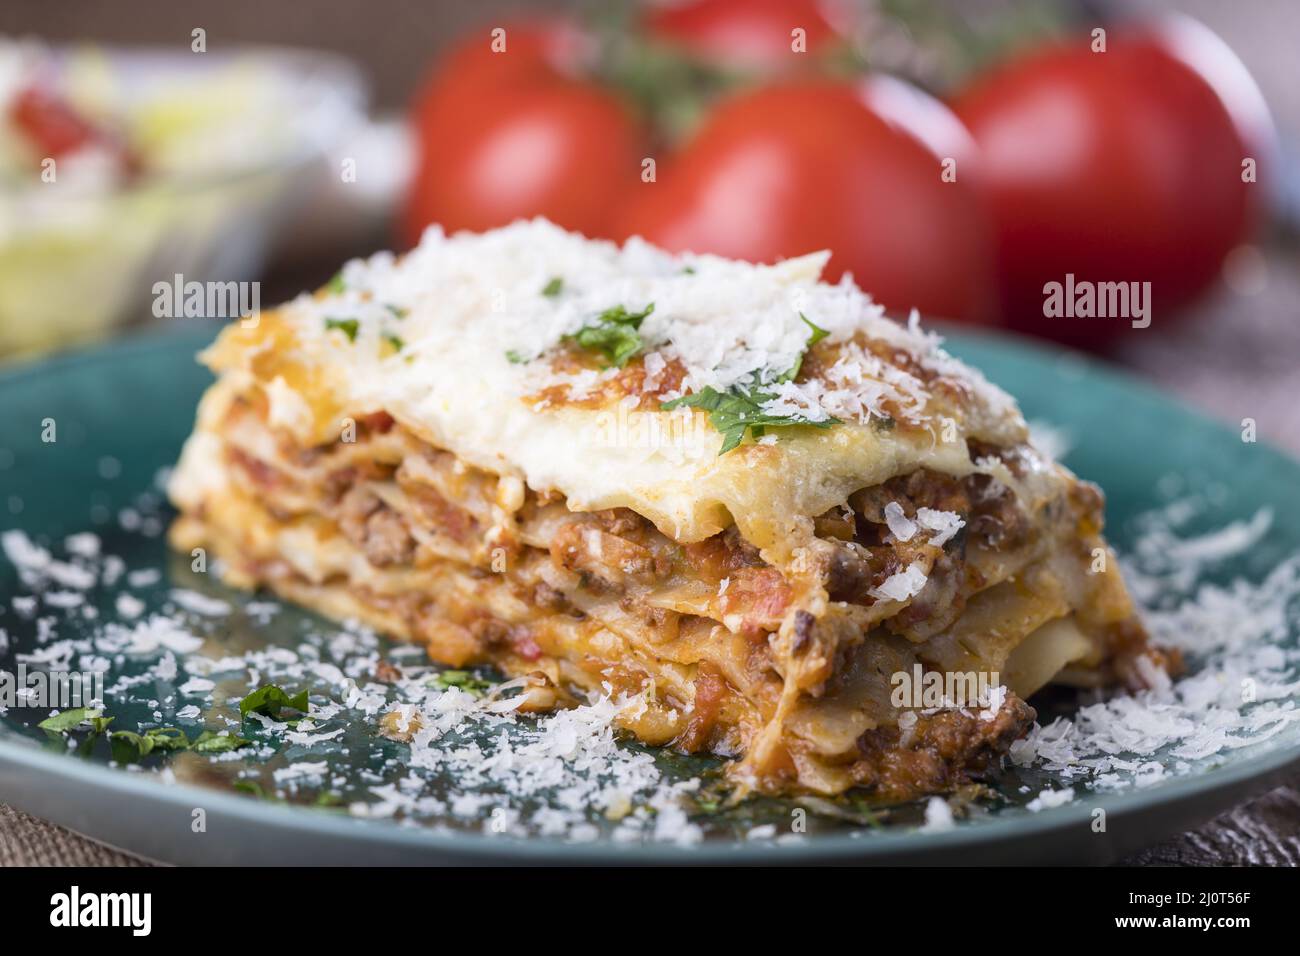 Portion of lasagna on a green plate Stock Photo